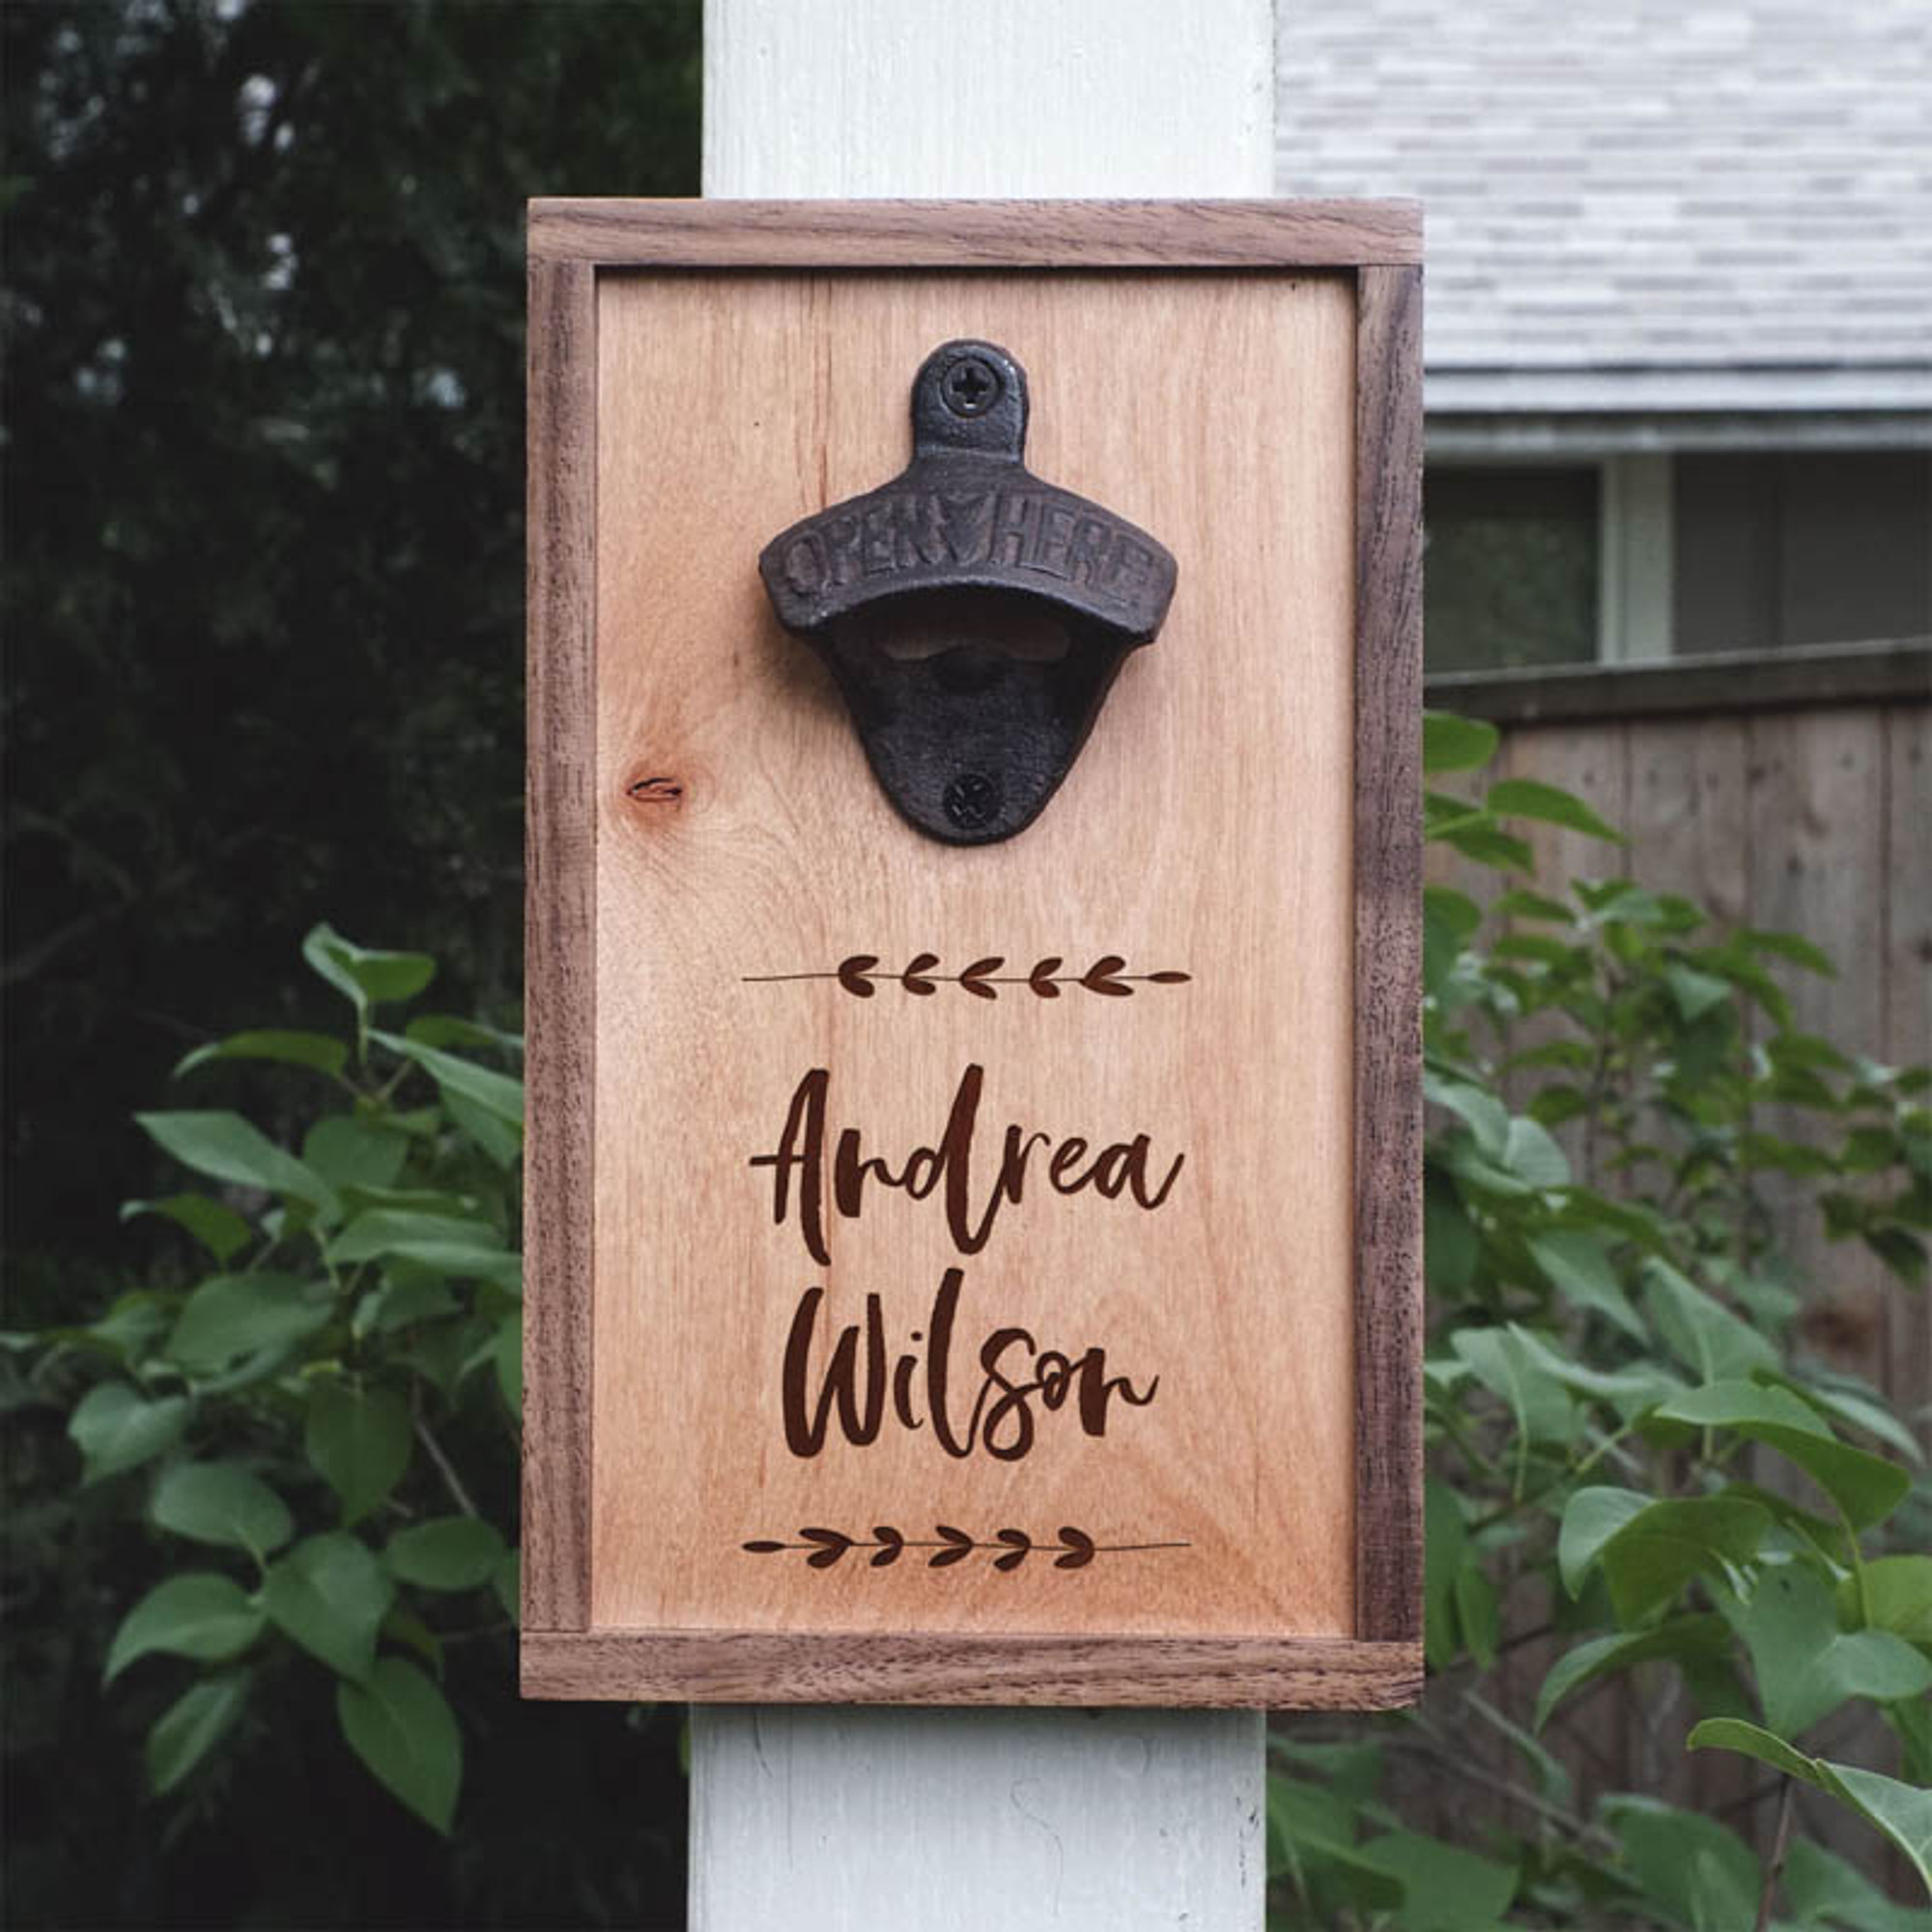 https://cdn11.bigcommerce.com/s-40f15/images/stencil/2000x2000/products/1360/7578/personalized-wooden-wall-mounted-bottle-opener-cute-script-WMB416__73800.1529081849.jpg?c=2